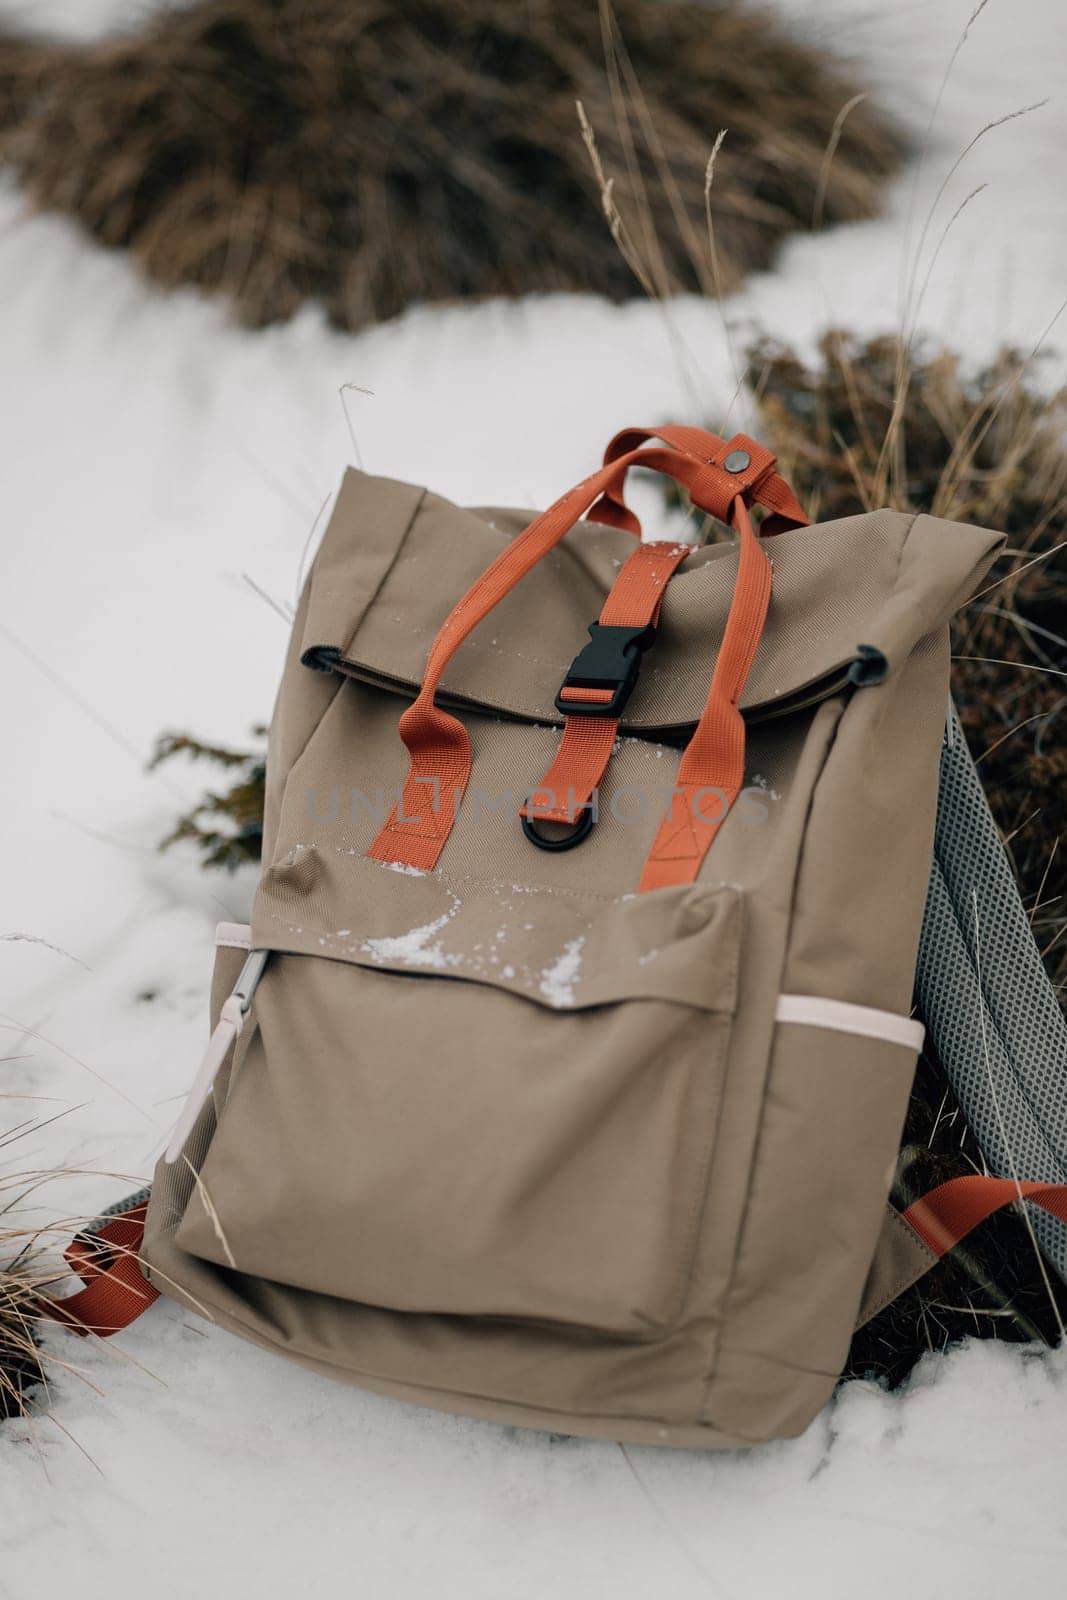 Abandoned Hiker's Backpack Covered in Fresh Snowfall by apavlin